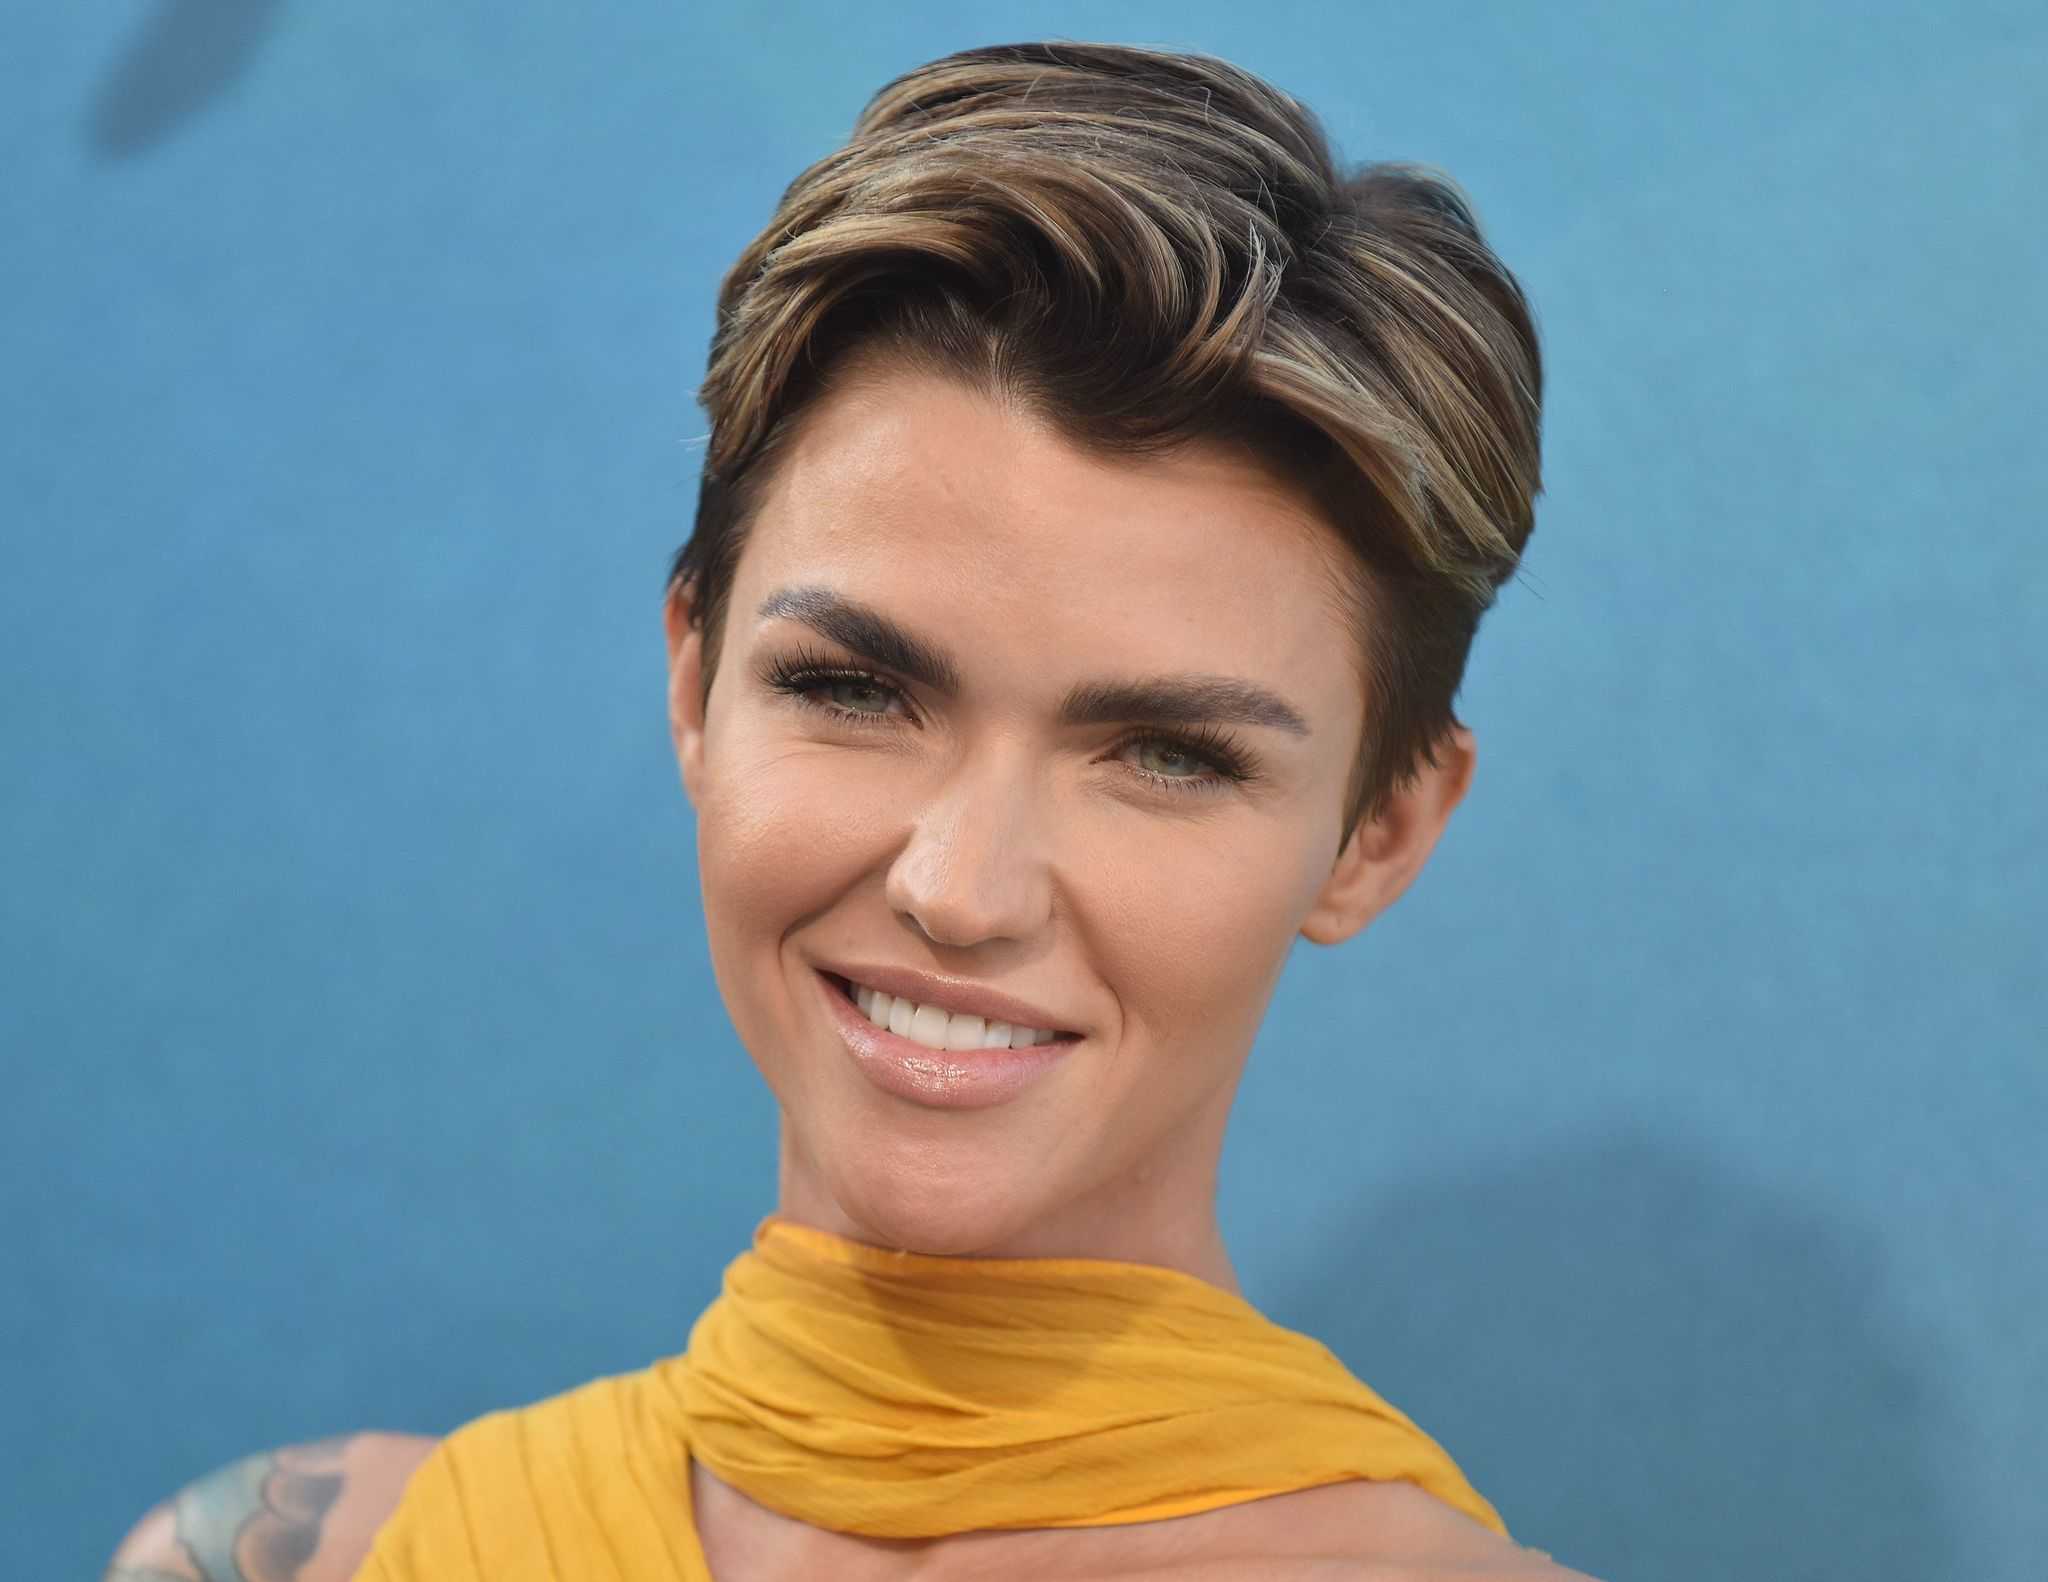 70+ Hot Pictures Of Ruby Rose – Batgirl In Arrowverse And Orange Is The New Black Star. 48